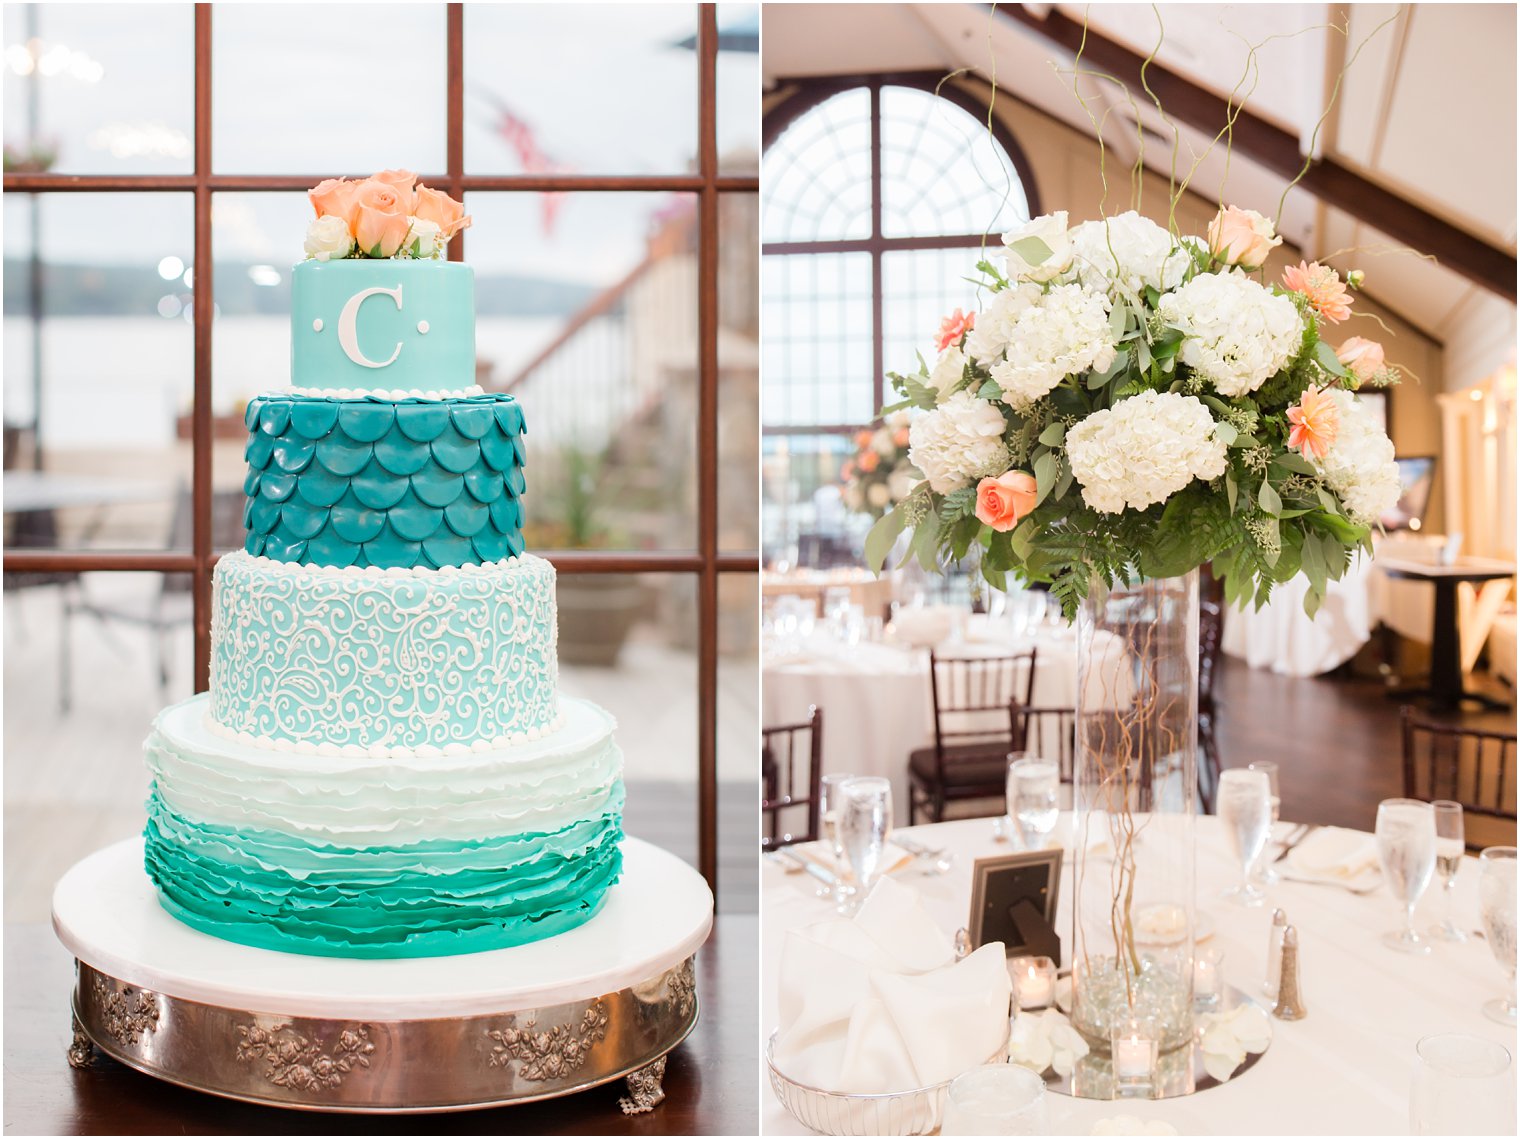 Tiered teal and white wedding cake by Carlo's bakery and white and coral centerpieces by Entenmann's Florist 